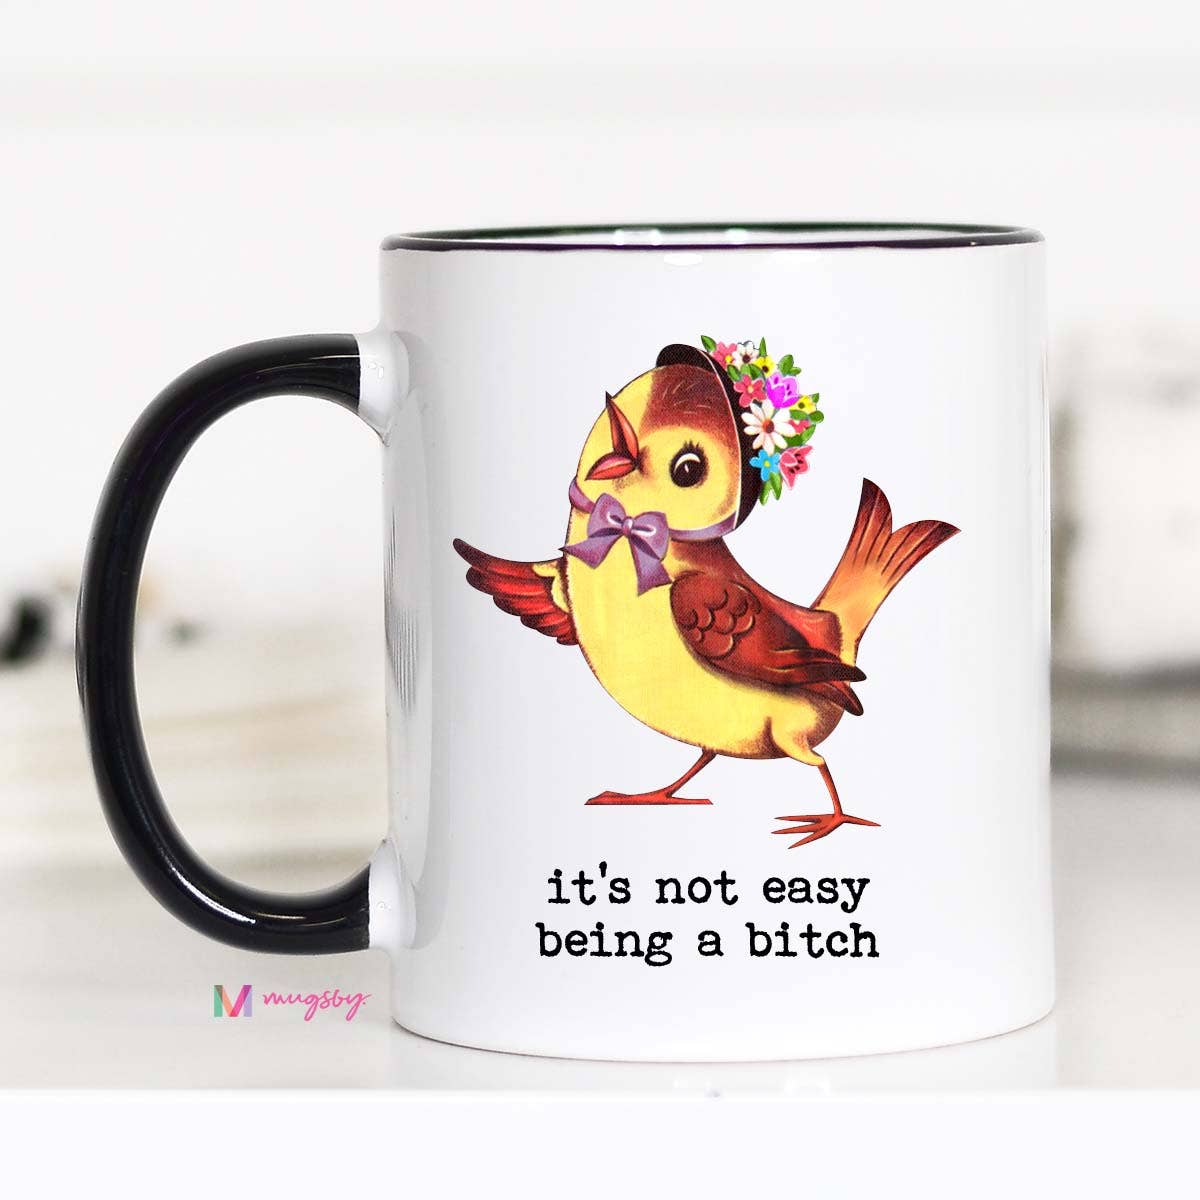 It's Not Easy Being a Bitch Mug: 11oz